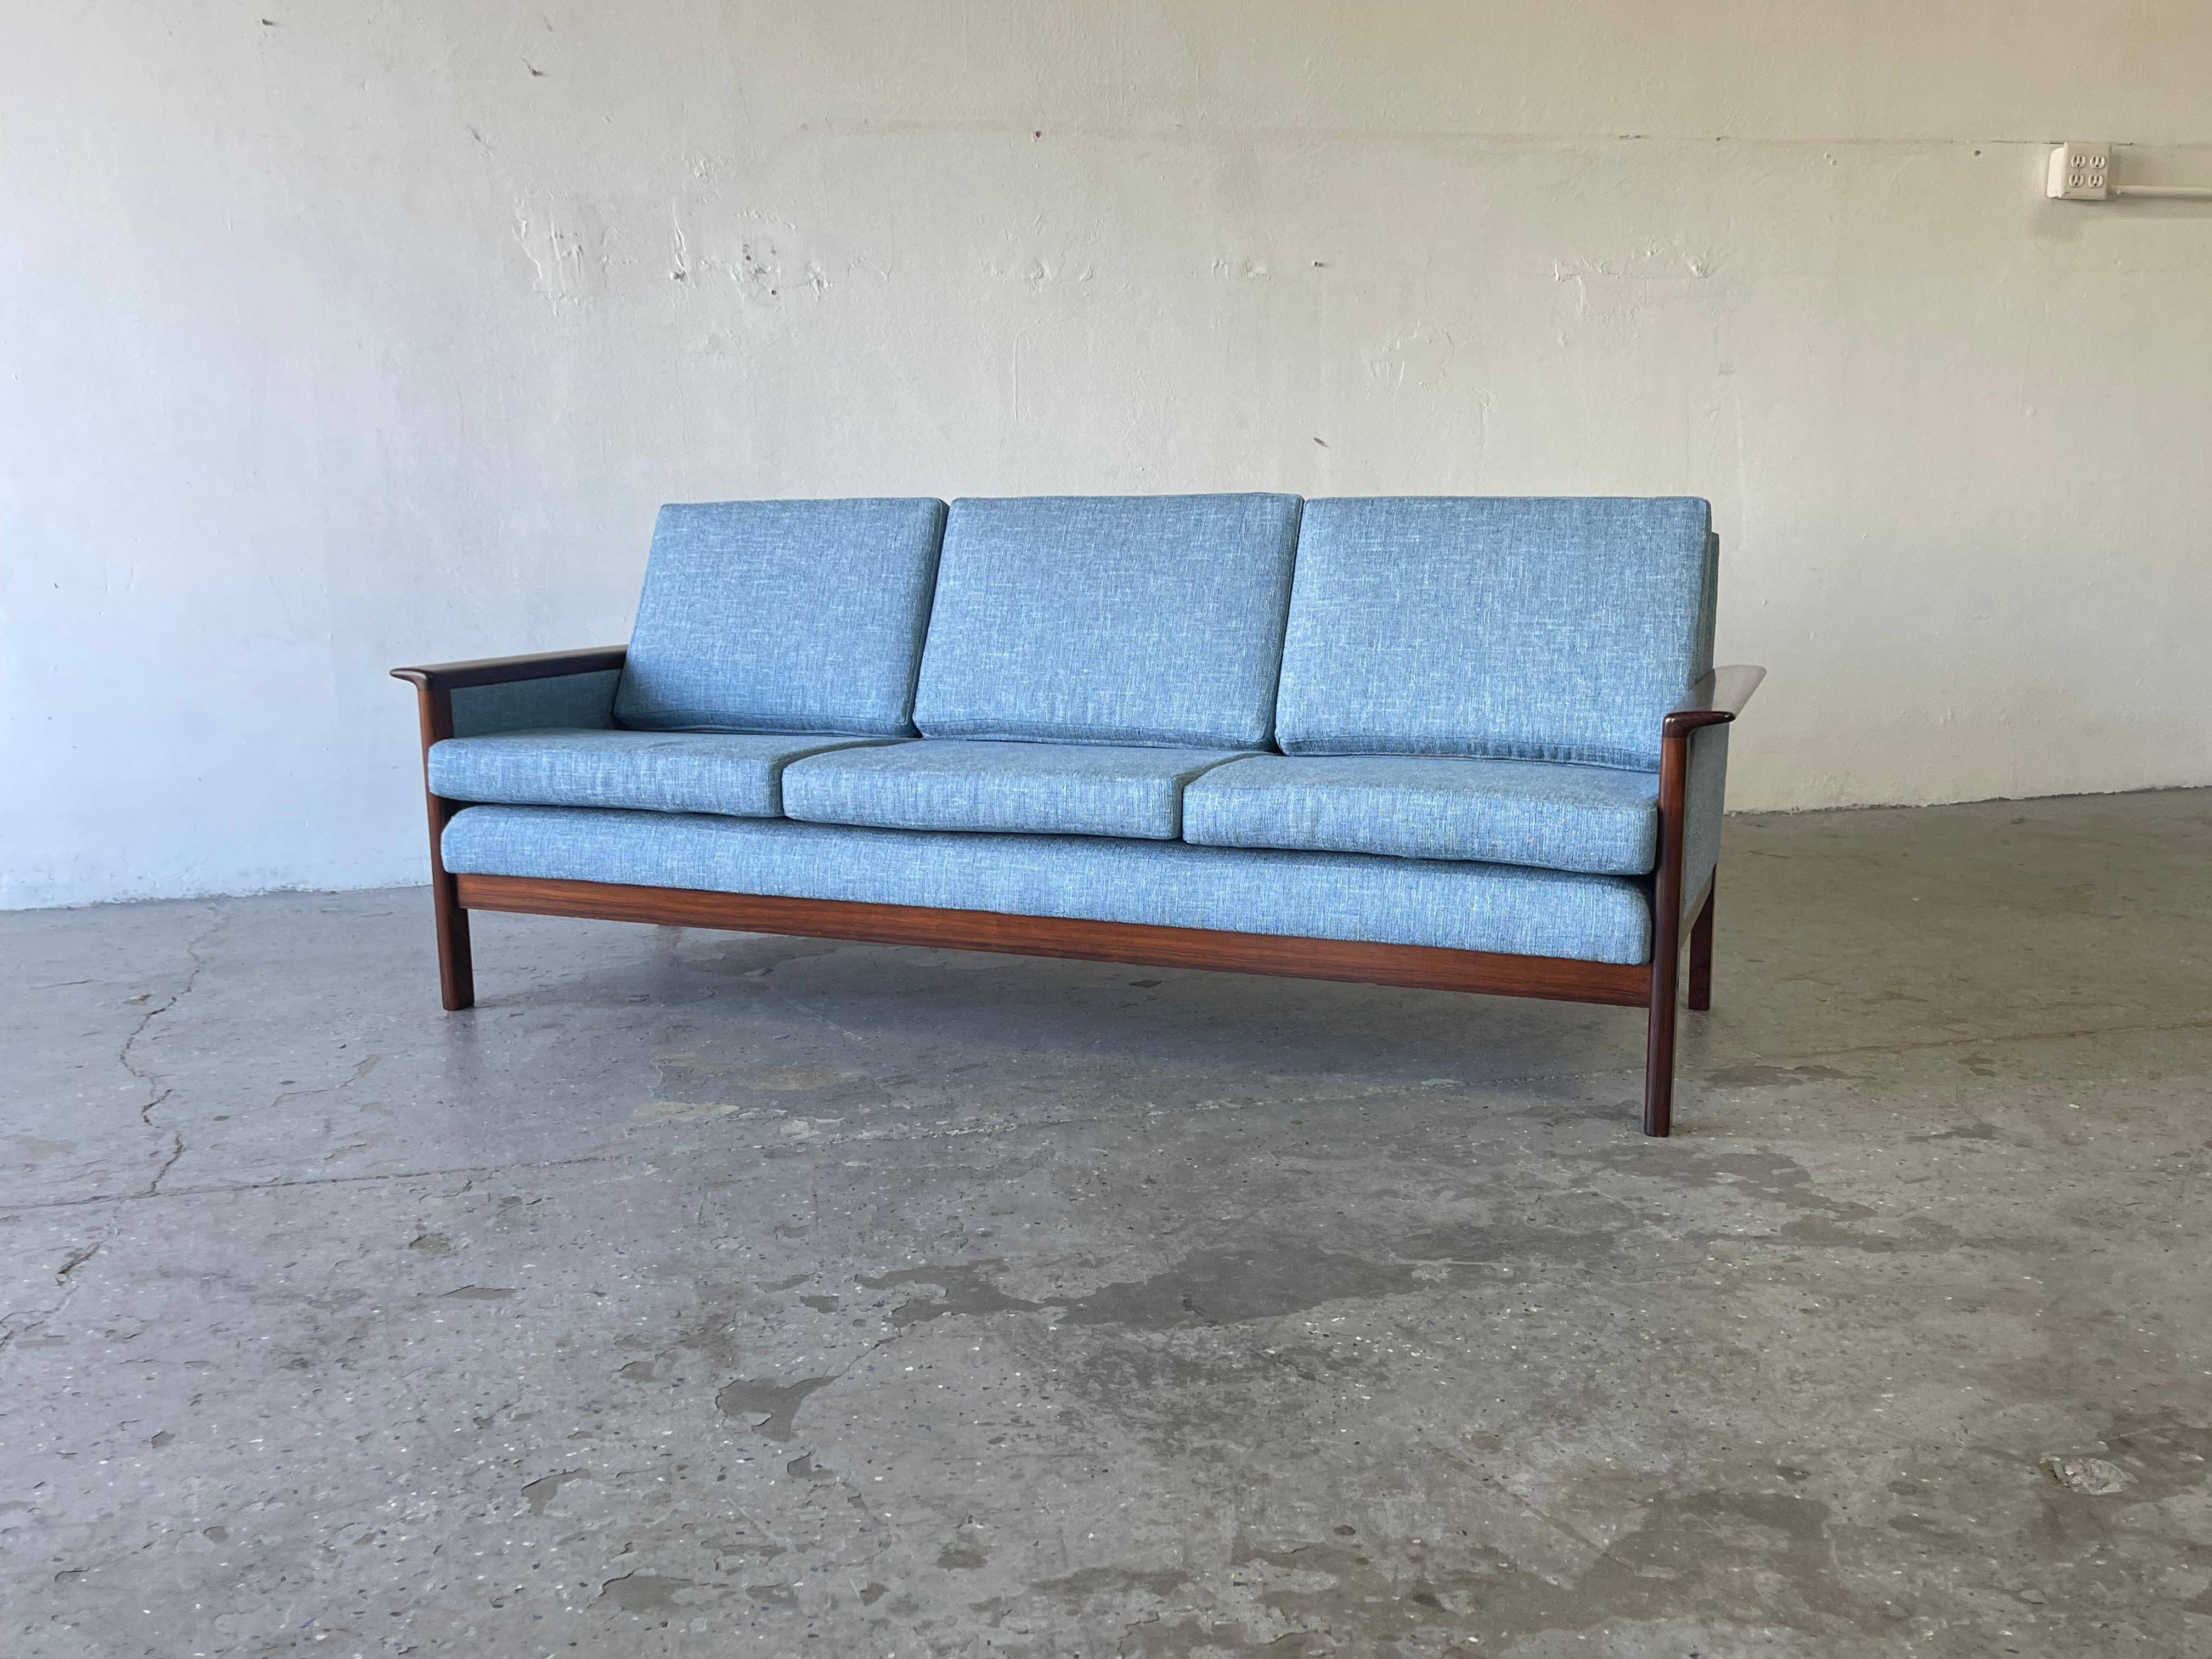 Danish Mid-Century Modern Rosewood Sofa by Westnofa In Excellent Condition For Sale In Las Vegas, NV